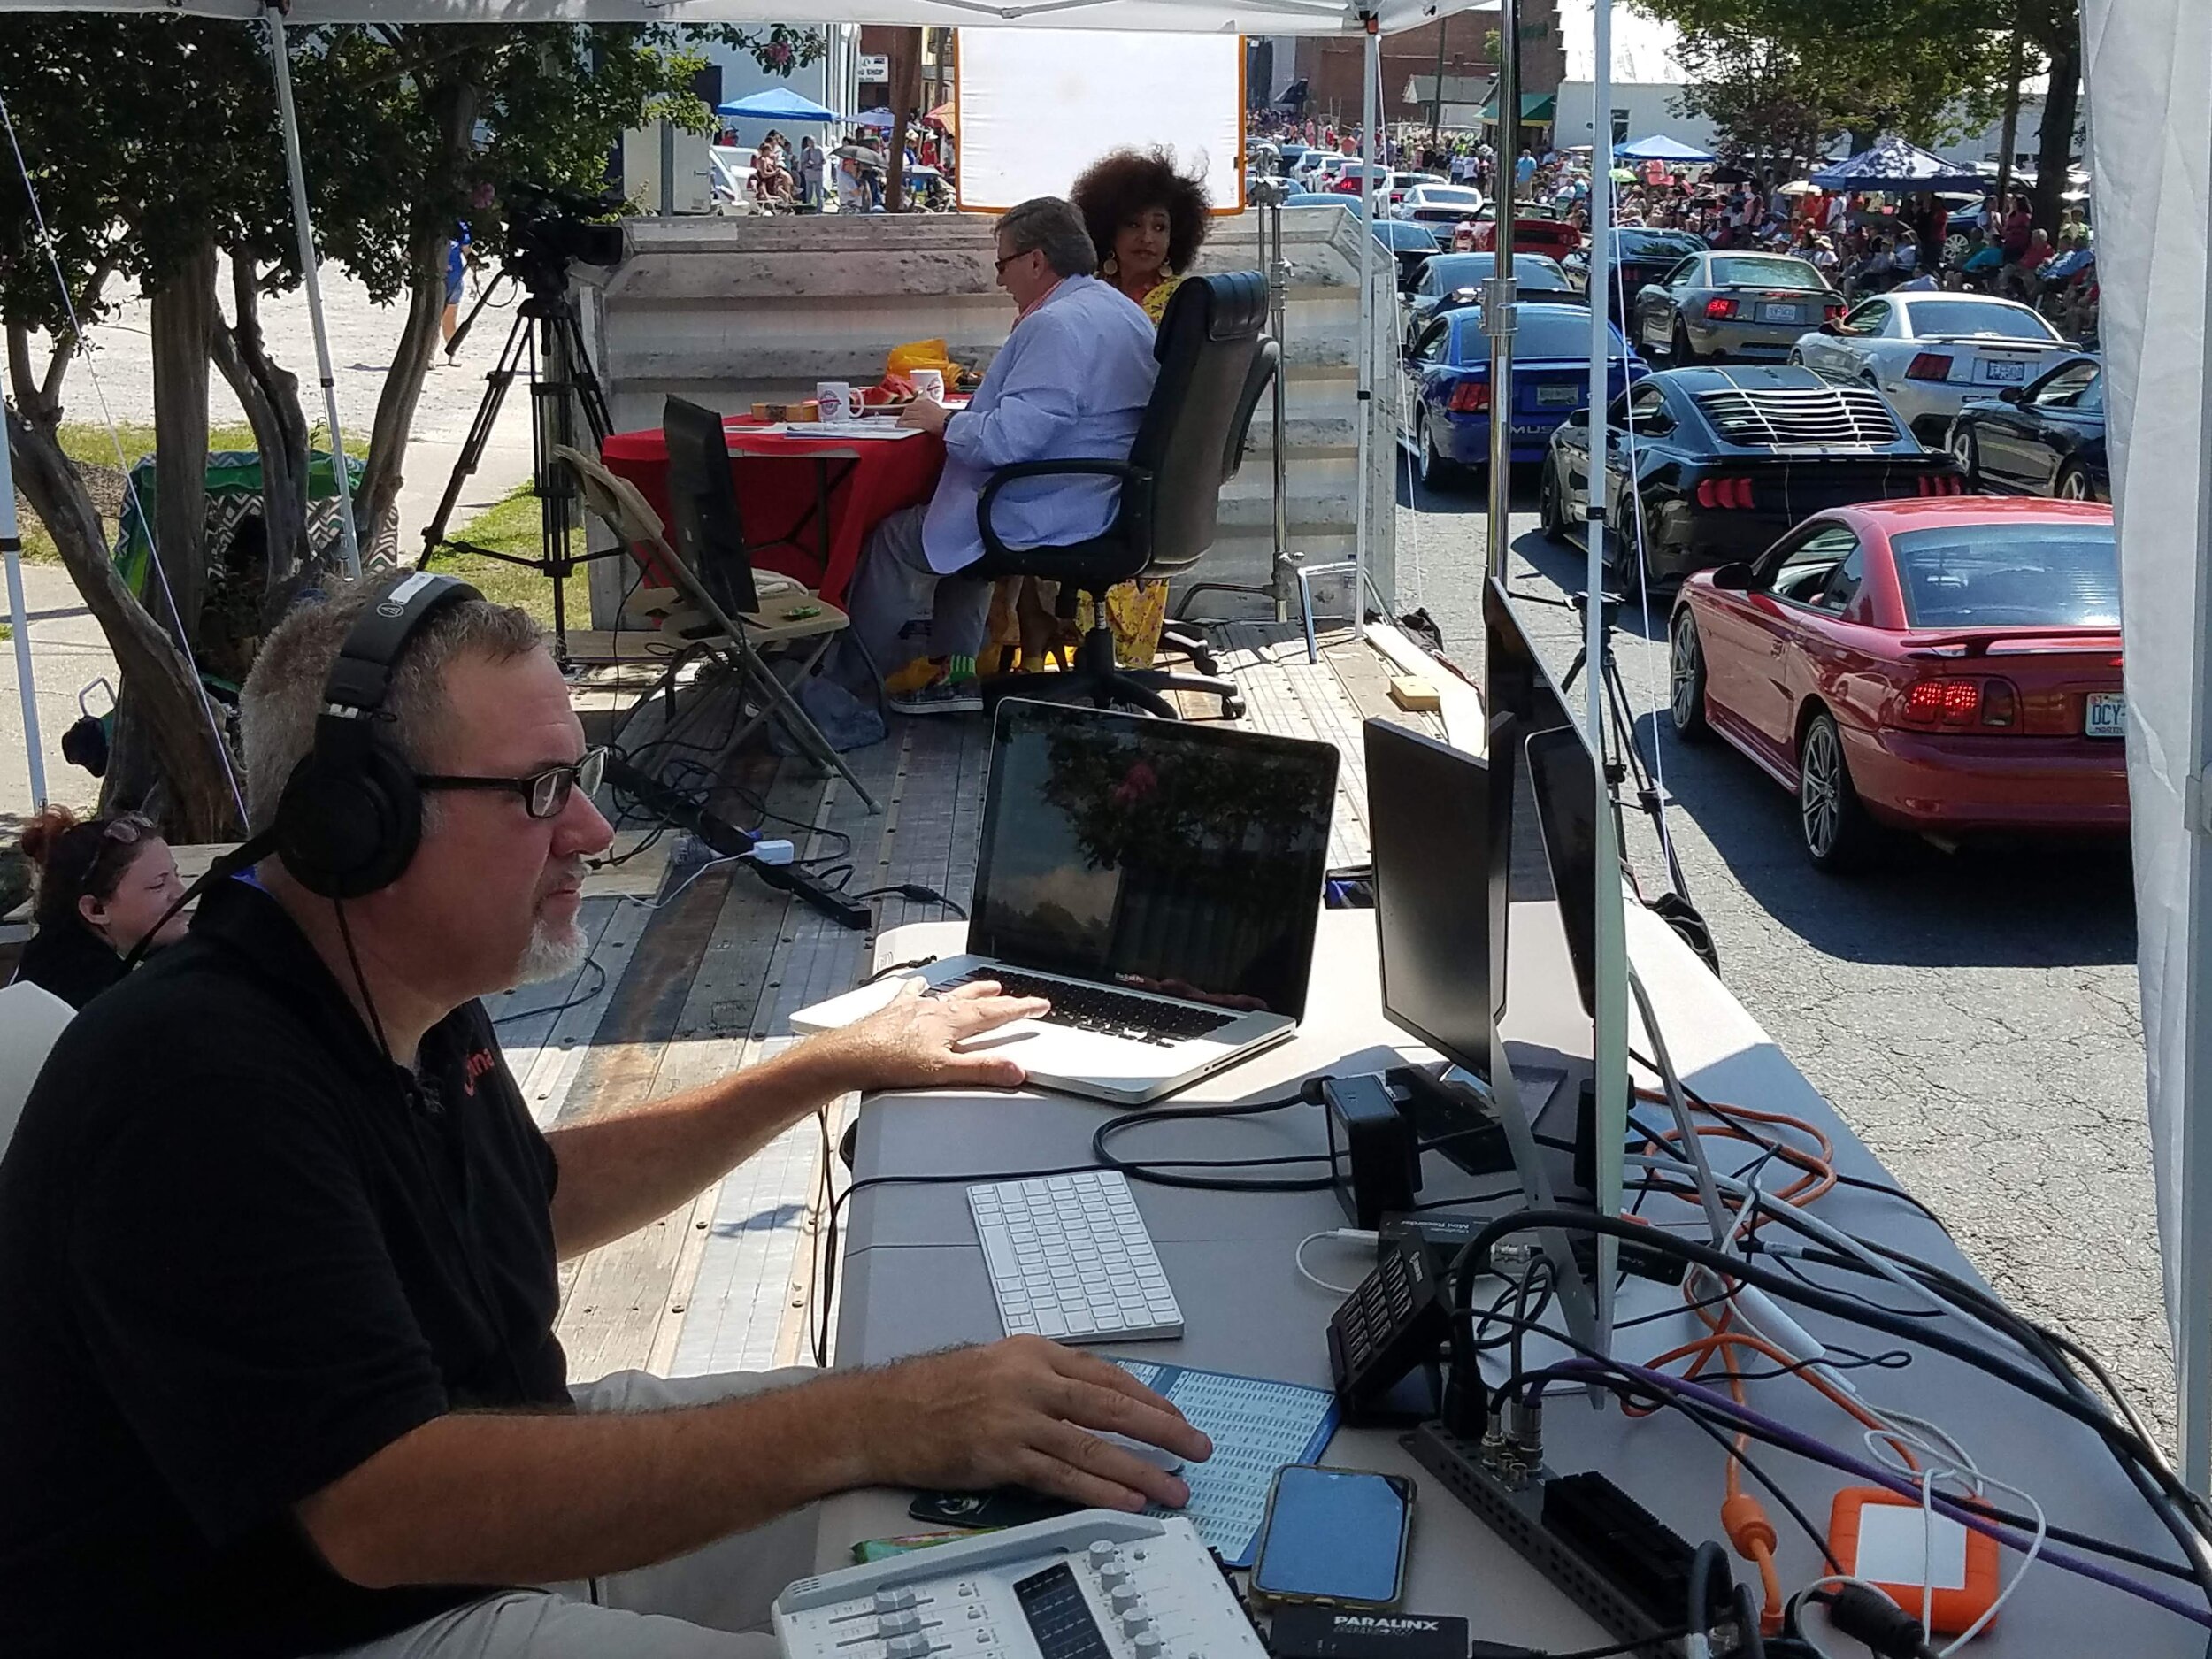  Live at the Annual Watermelon Festival in Pageland, SC 